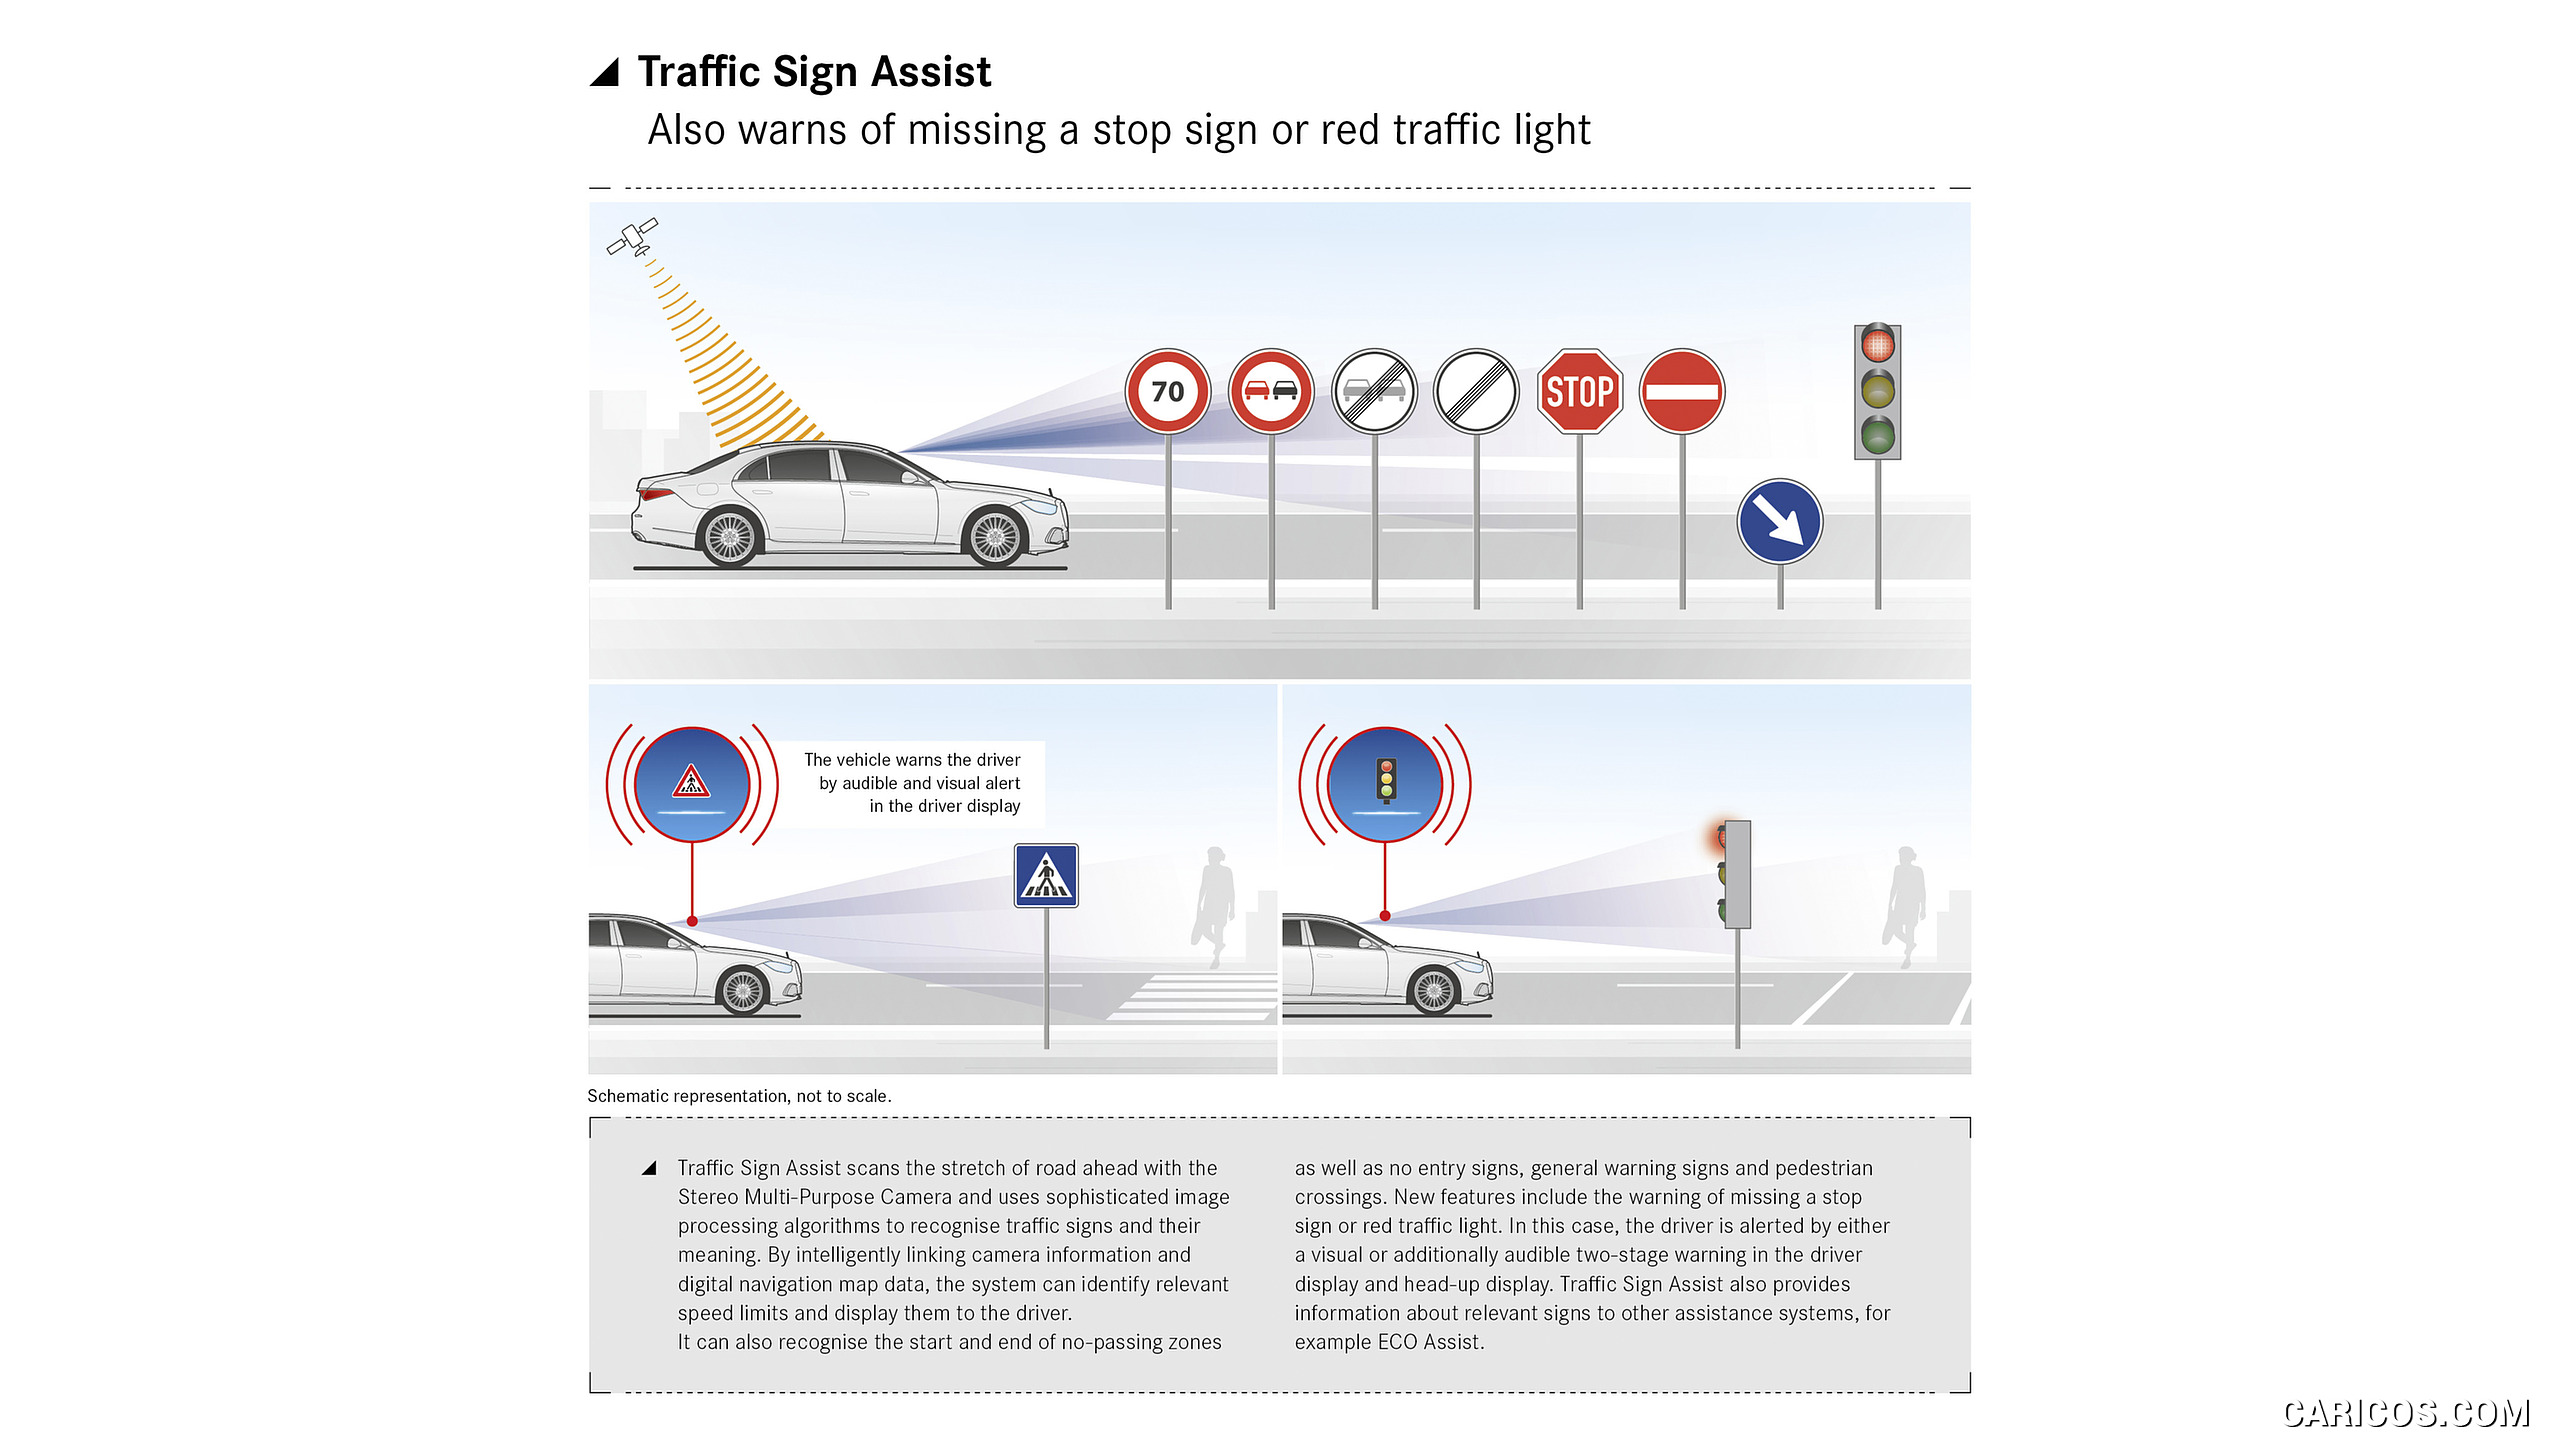 2021 Mercedes-Benz S-Class - Driving assistance system: Traffic Sign Assist, #202 of 316